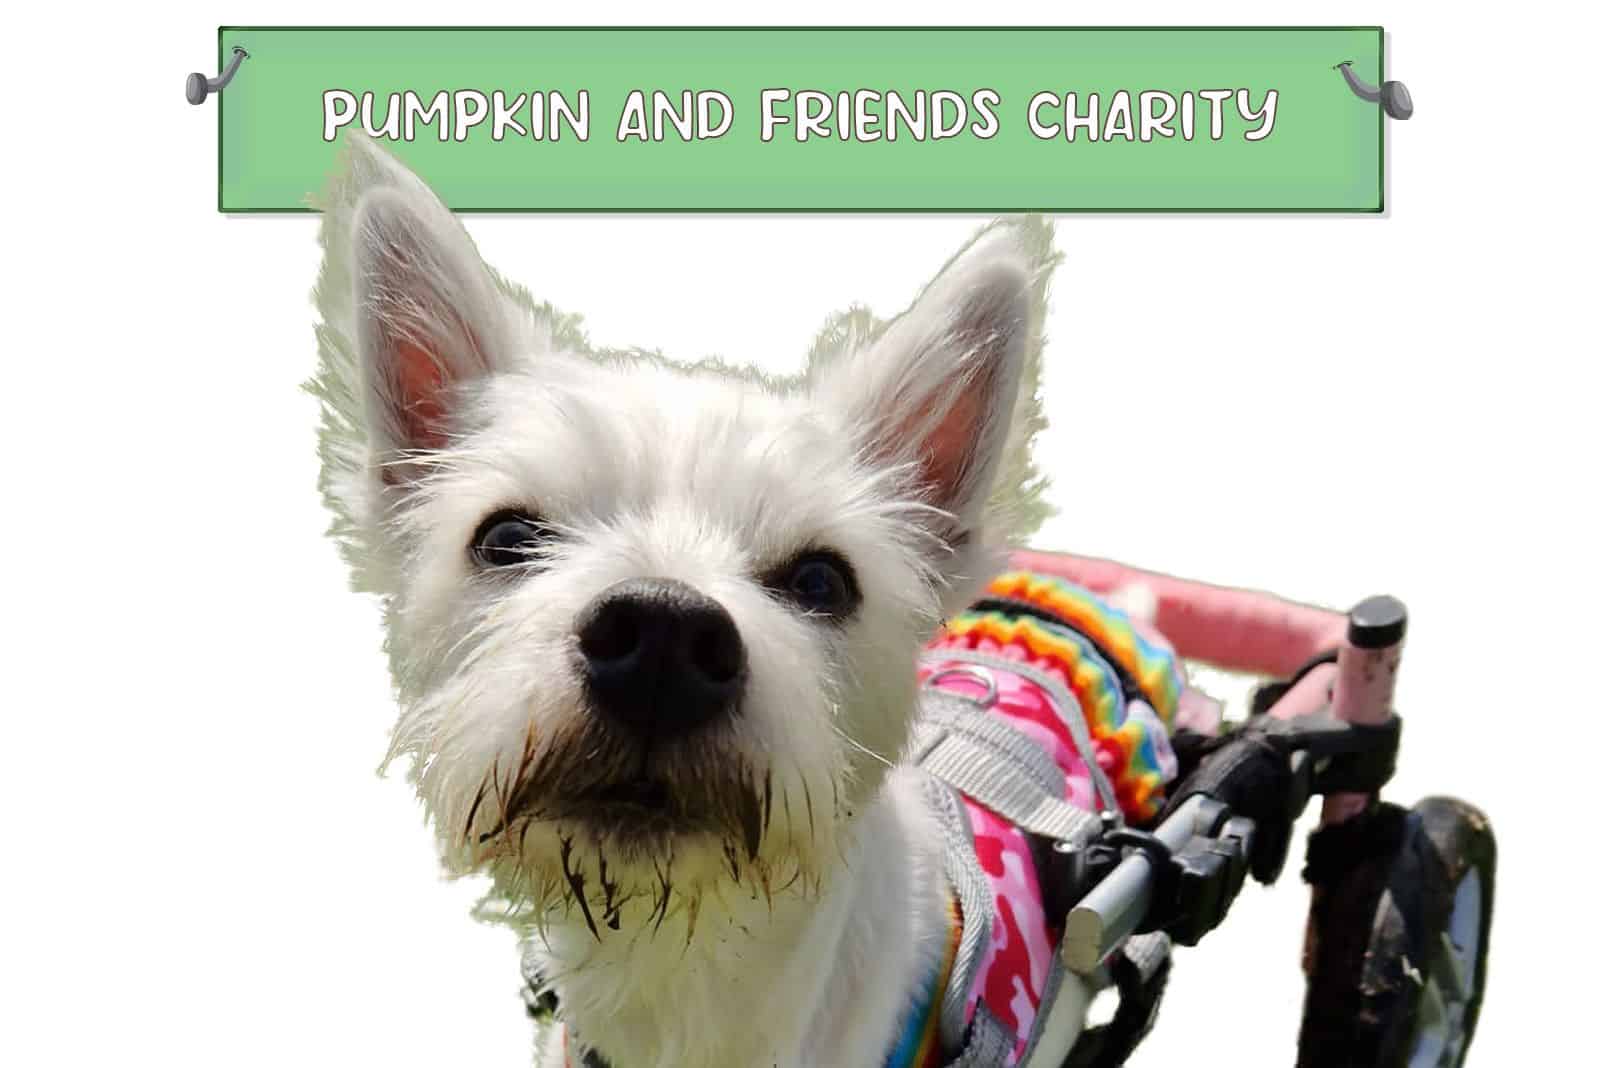 Pumpkin, The Dog In A Wheelchair, Has A Non-Profit That Helps Other Dogs